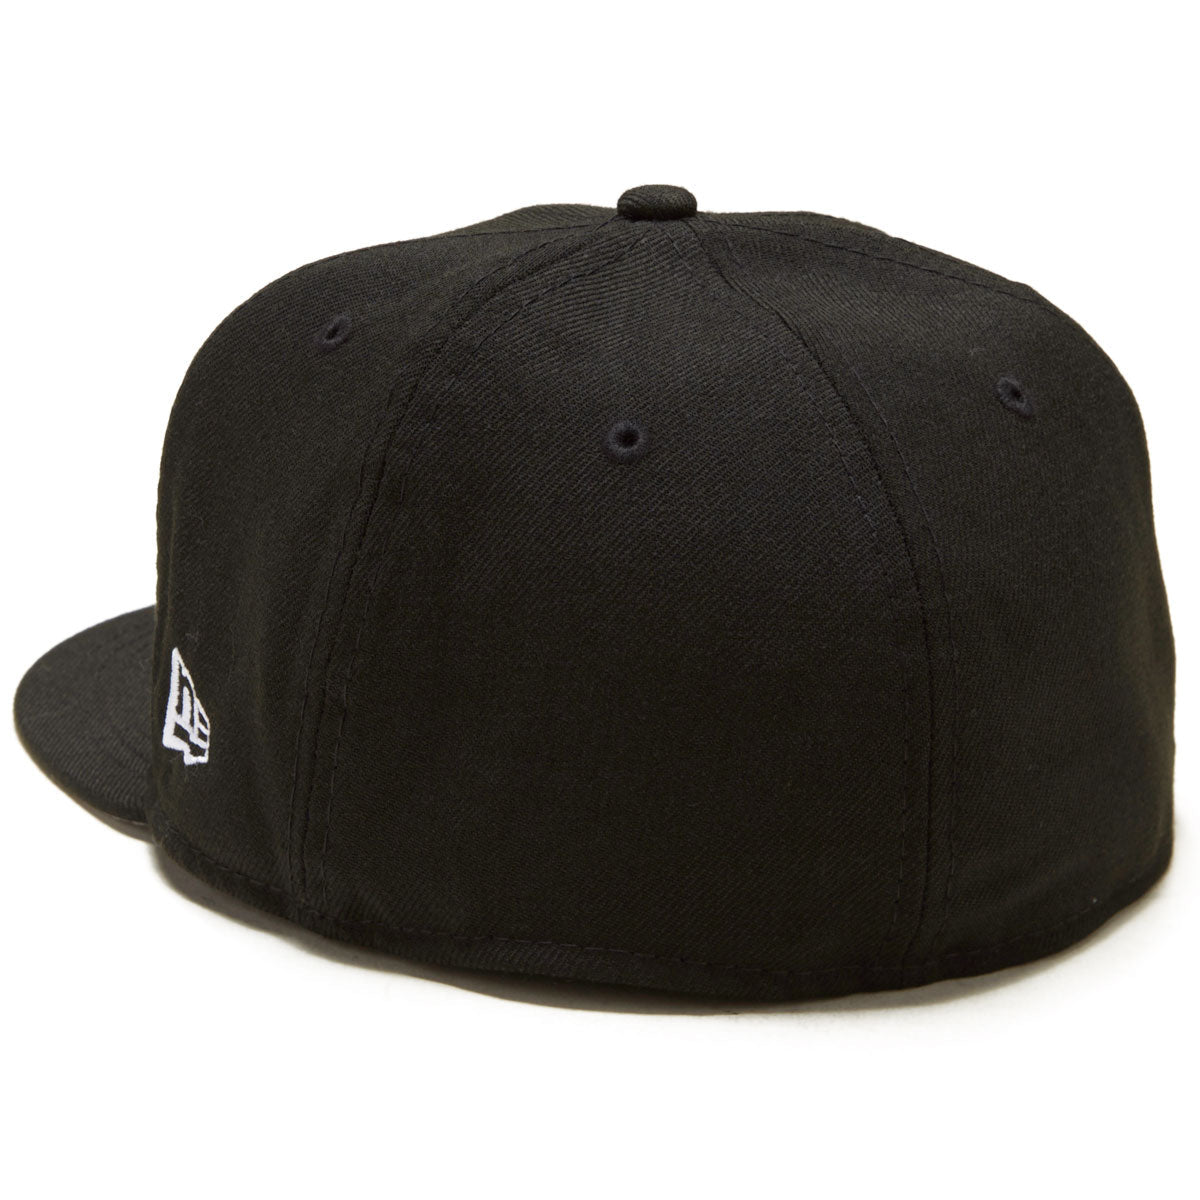 RDS New Era Dynasty Hat - Black/Red image 2